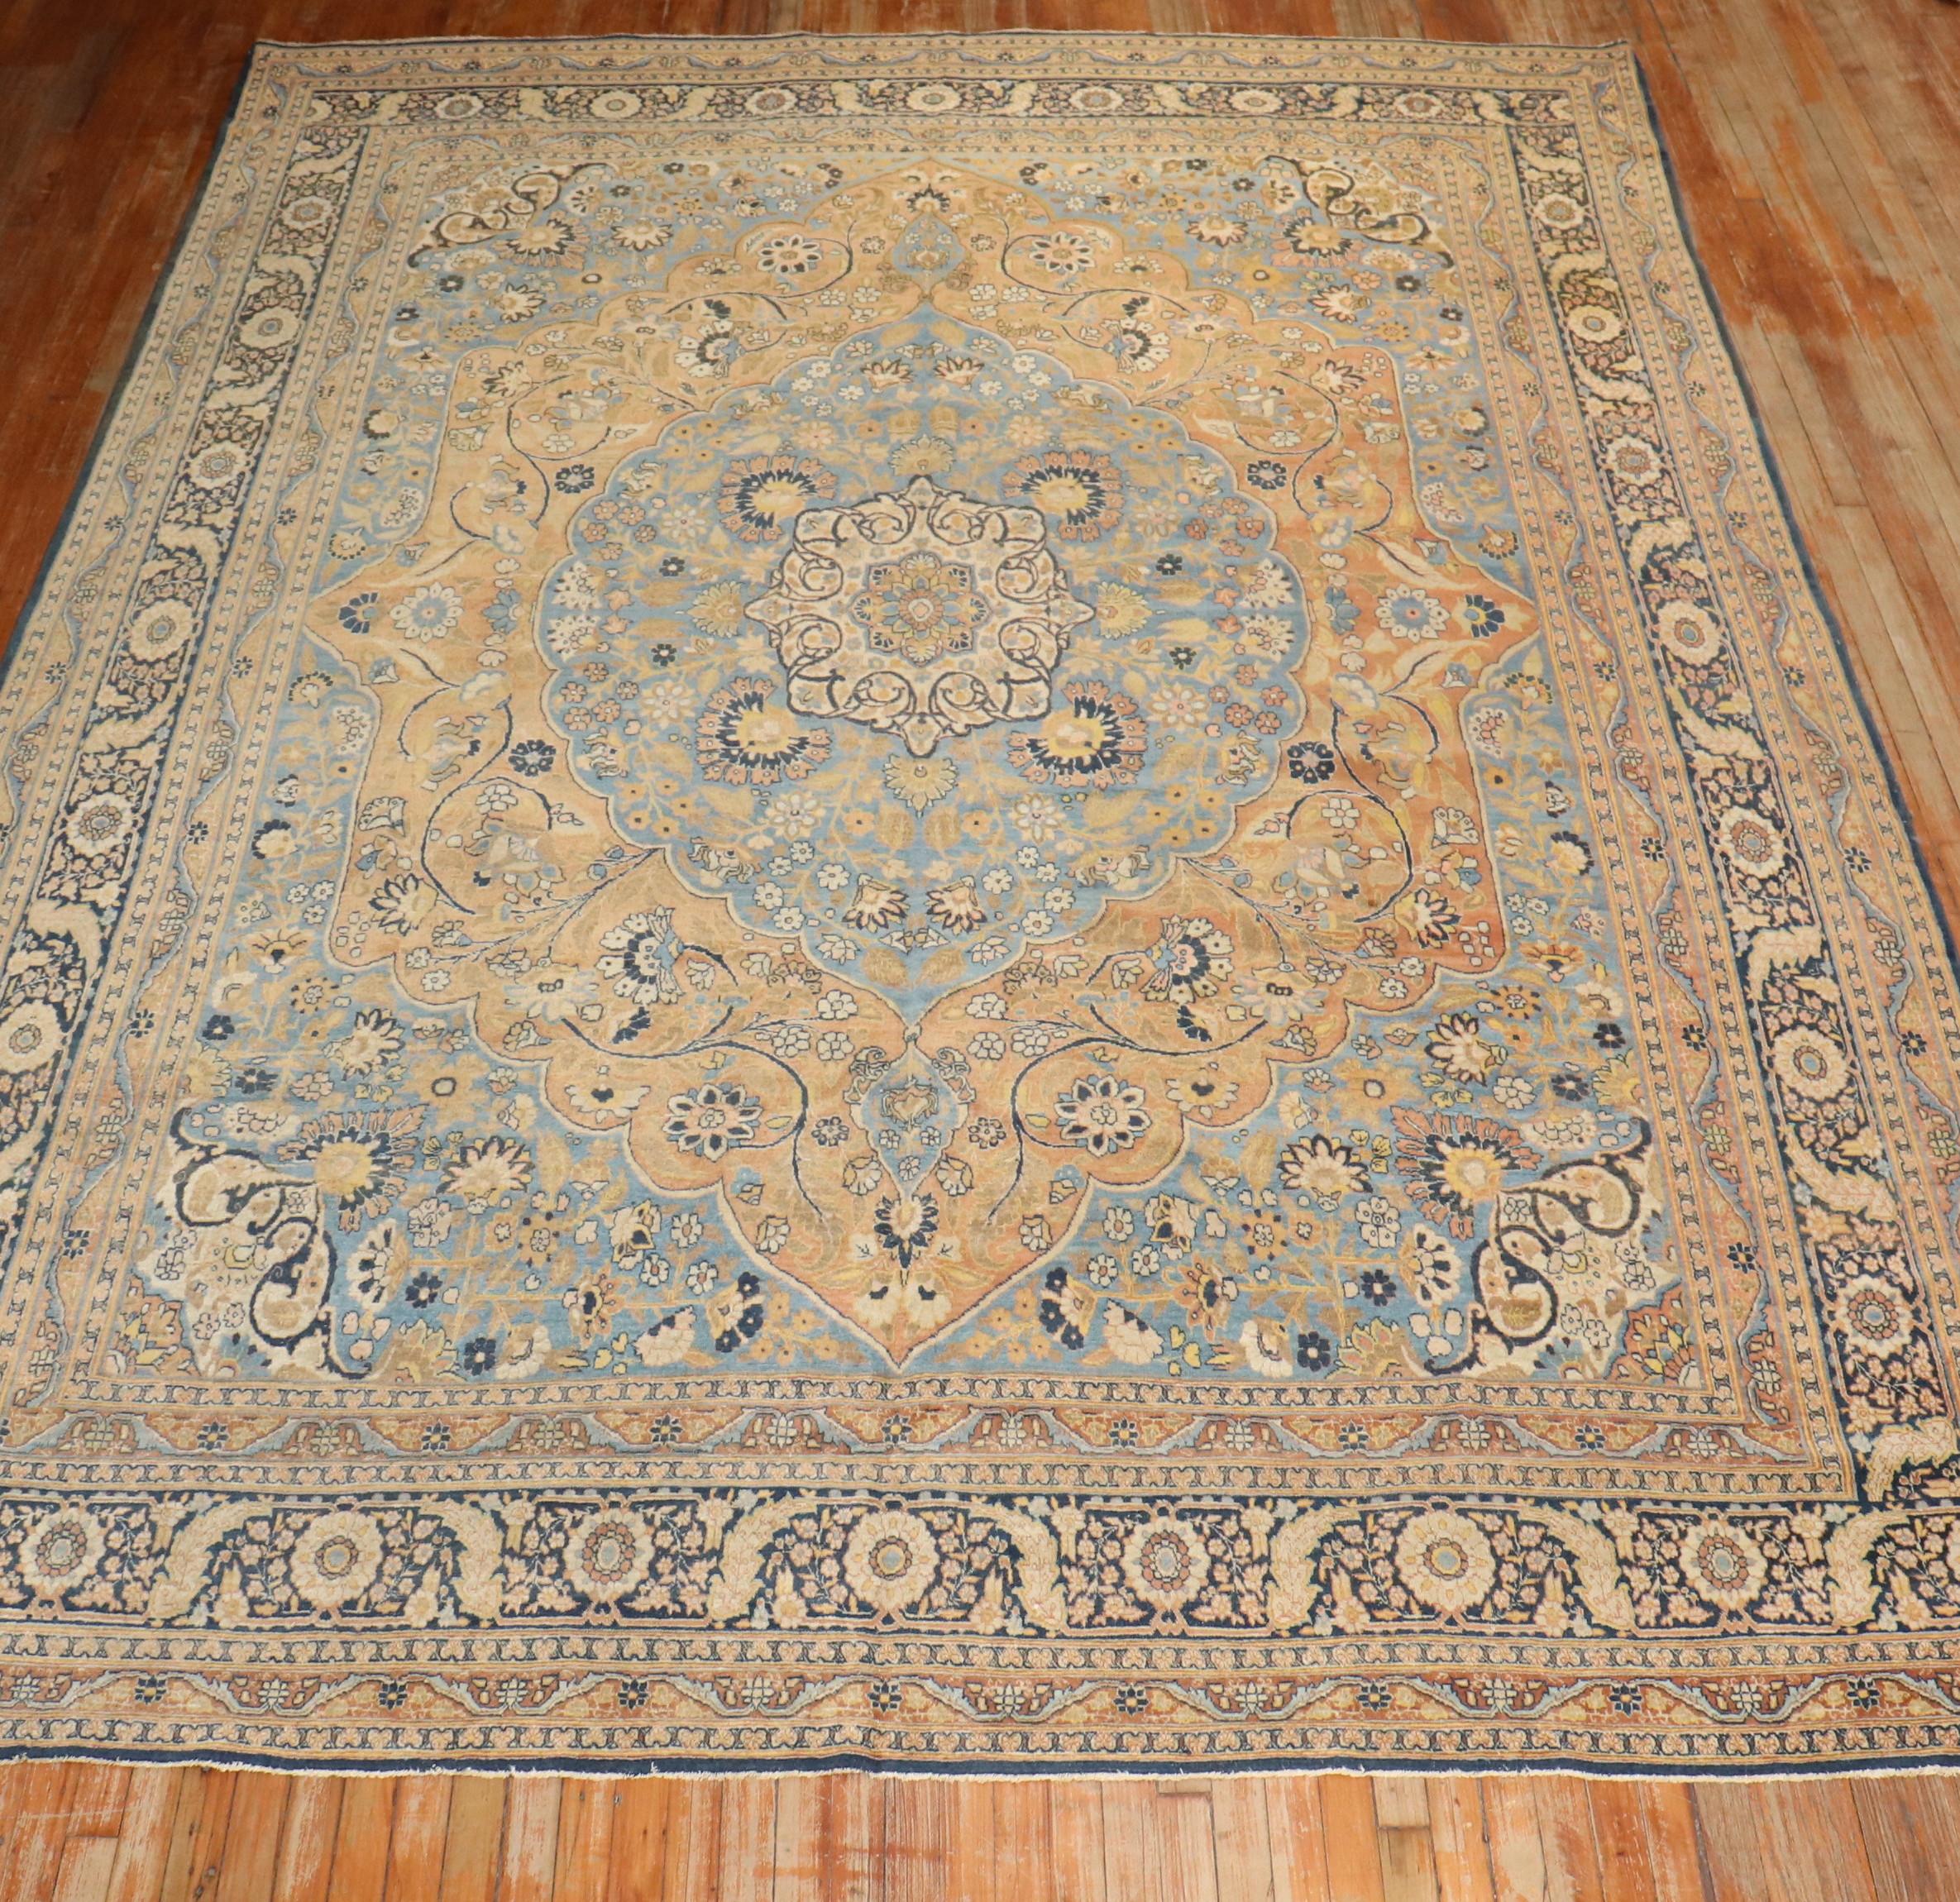 Zabihi Collection Early 20th Century Room Antique Persian Tabriz Rug In Good Condition For Sale In New York, NY